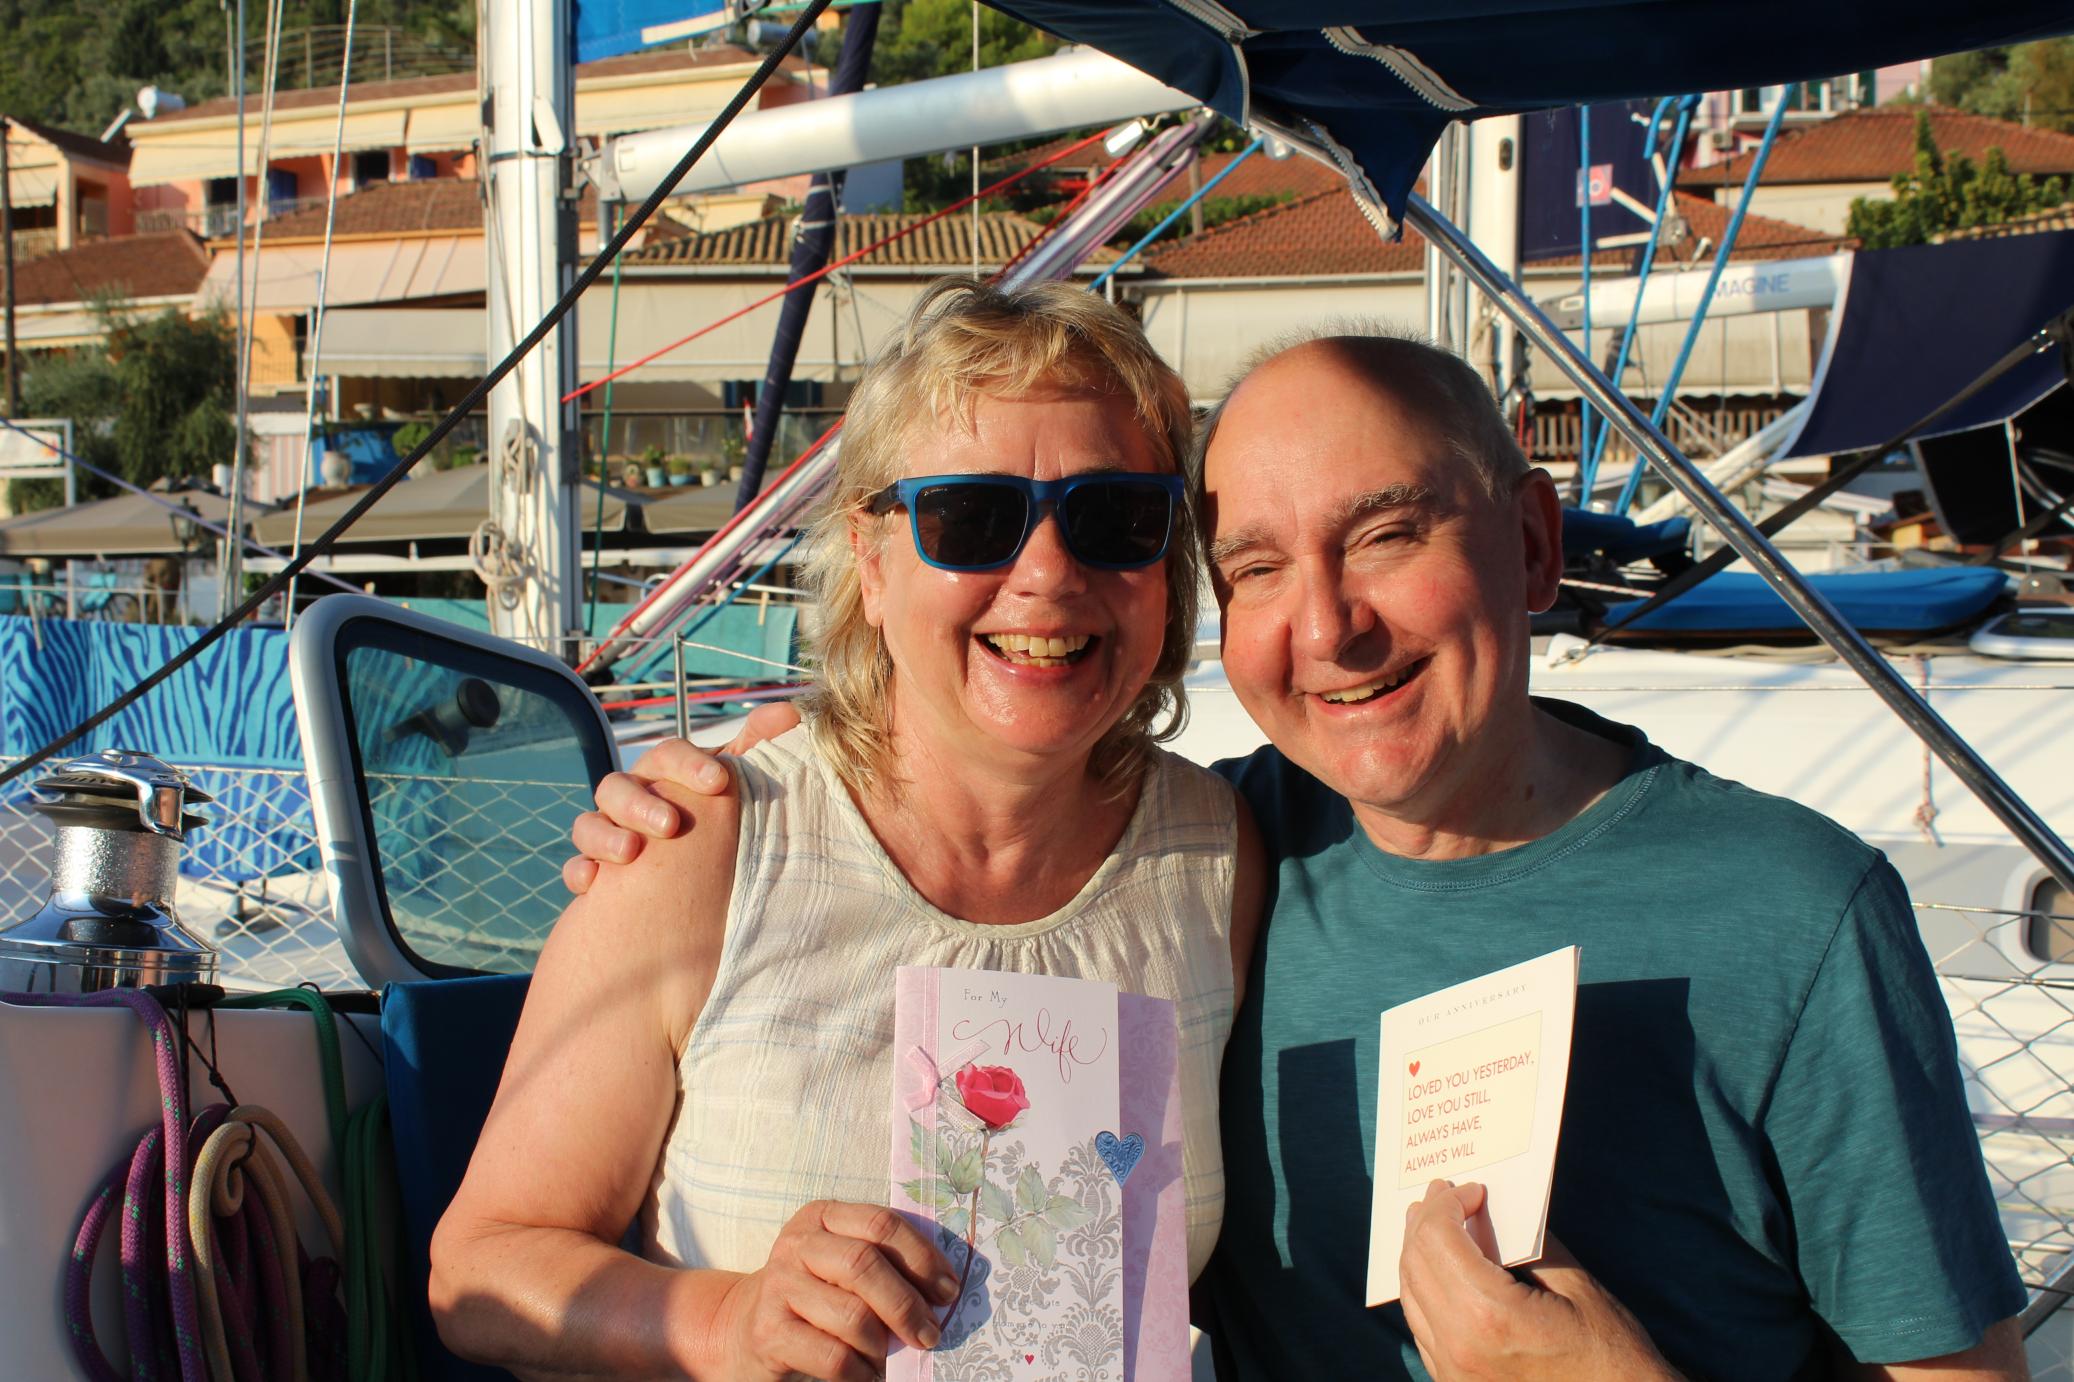 Jane & Dave celebrating their wedding anniversary on Nericus at Frikes, Ithaca, 12 Sept.